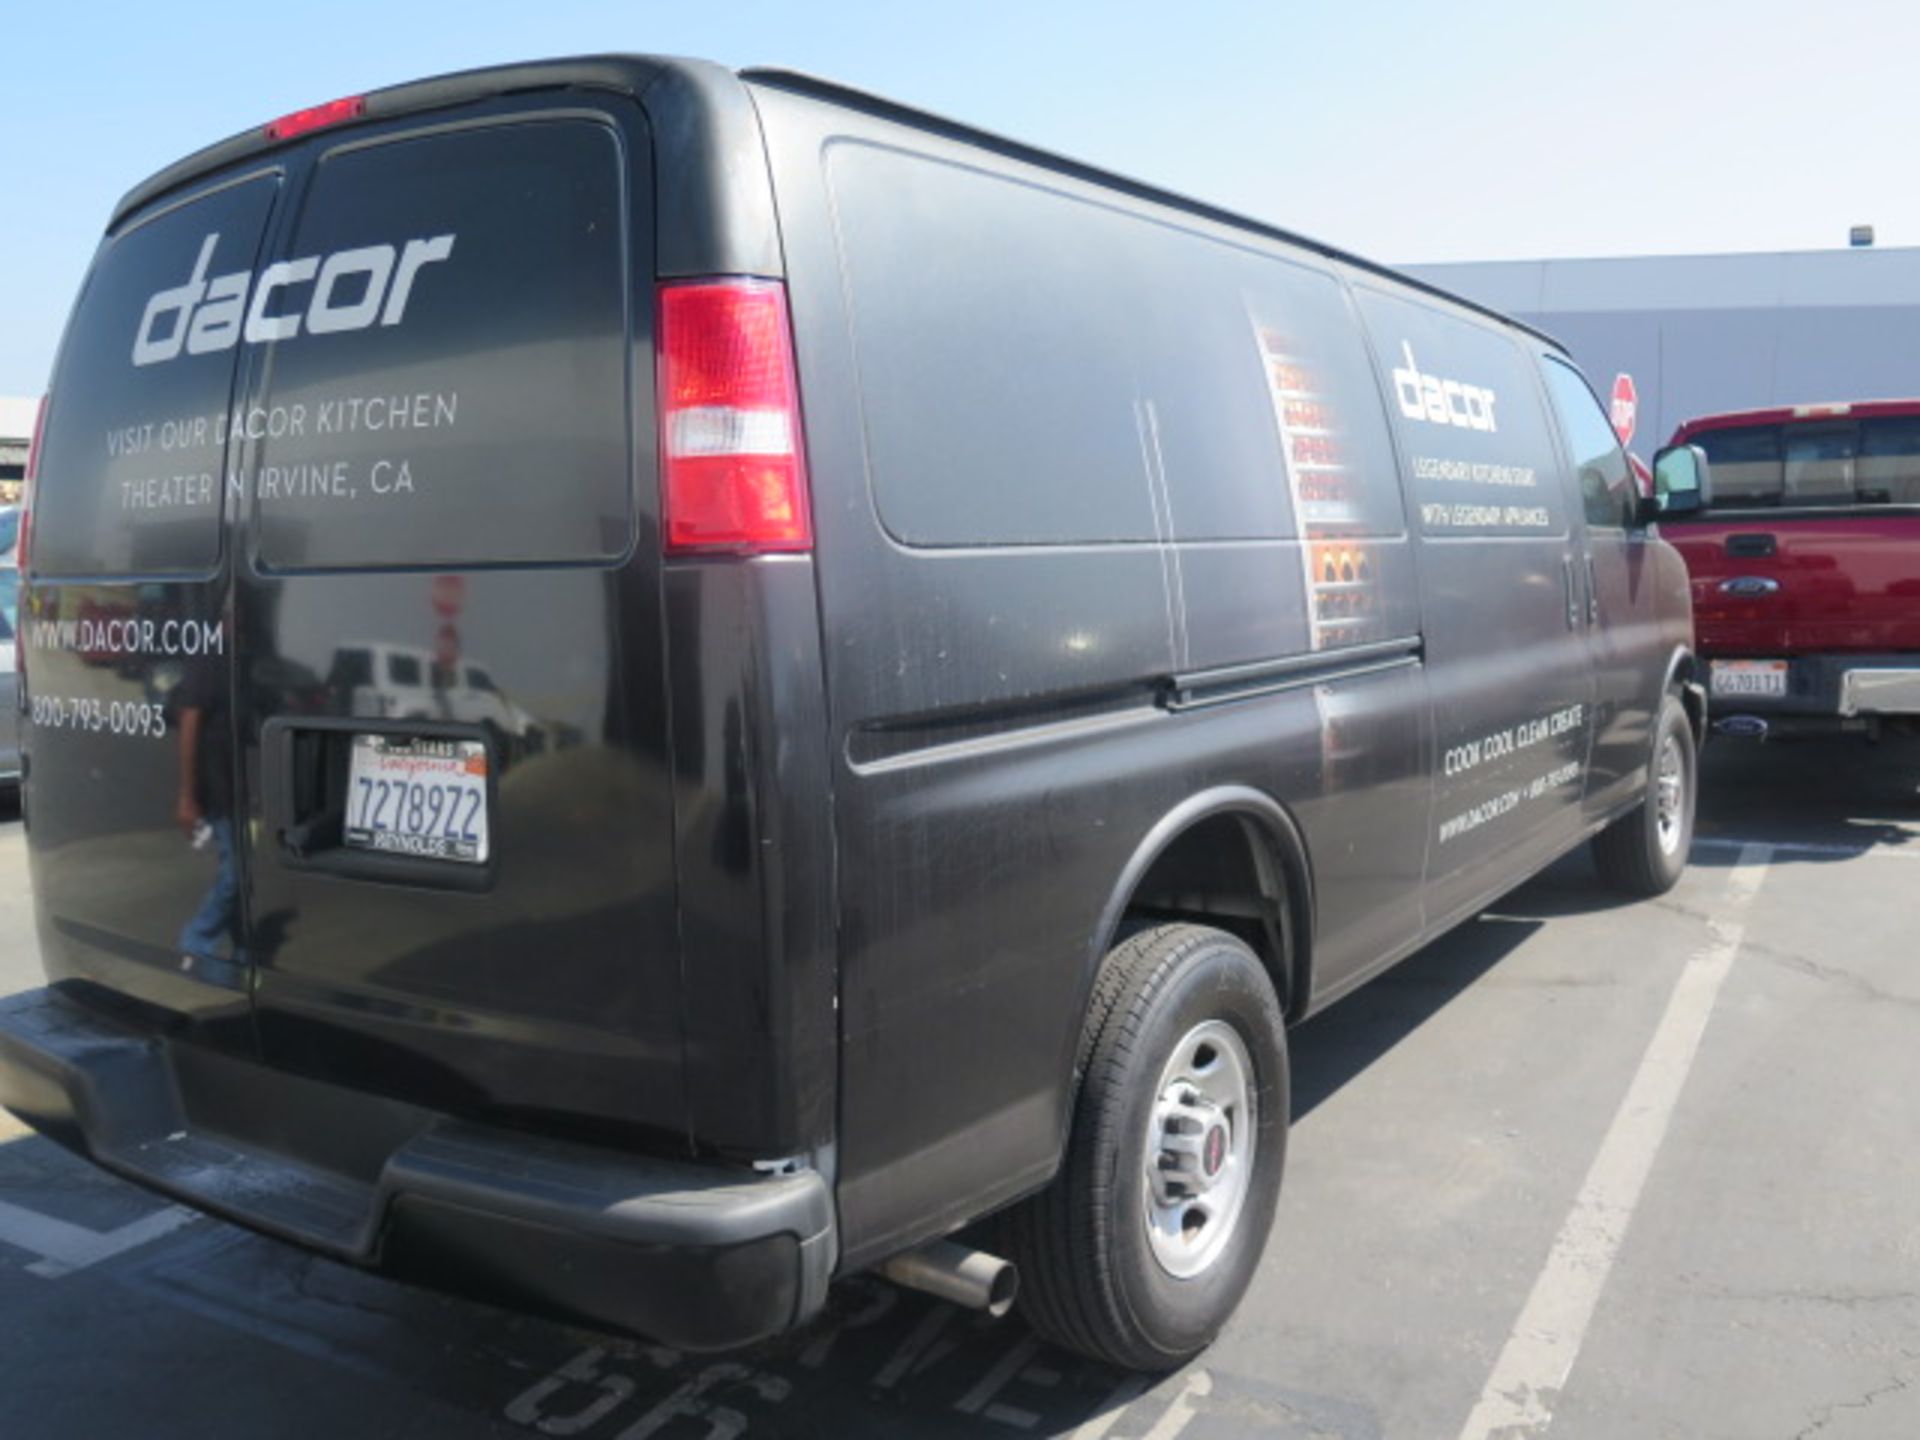 2020 GMC Savana Cargo Van Lisc# 72789Z2 w/ 4.3L Gas Engine, Auto Trans, Tow Package, SOLD AS IS - Image 5 of 21